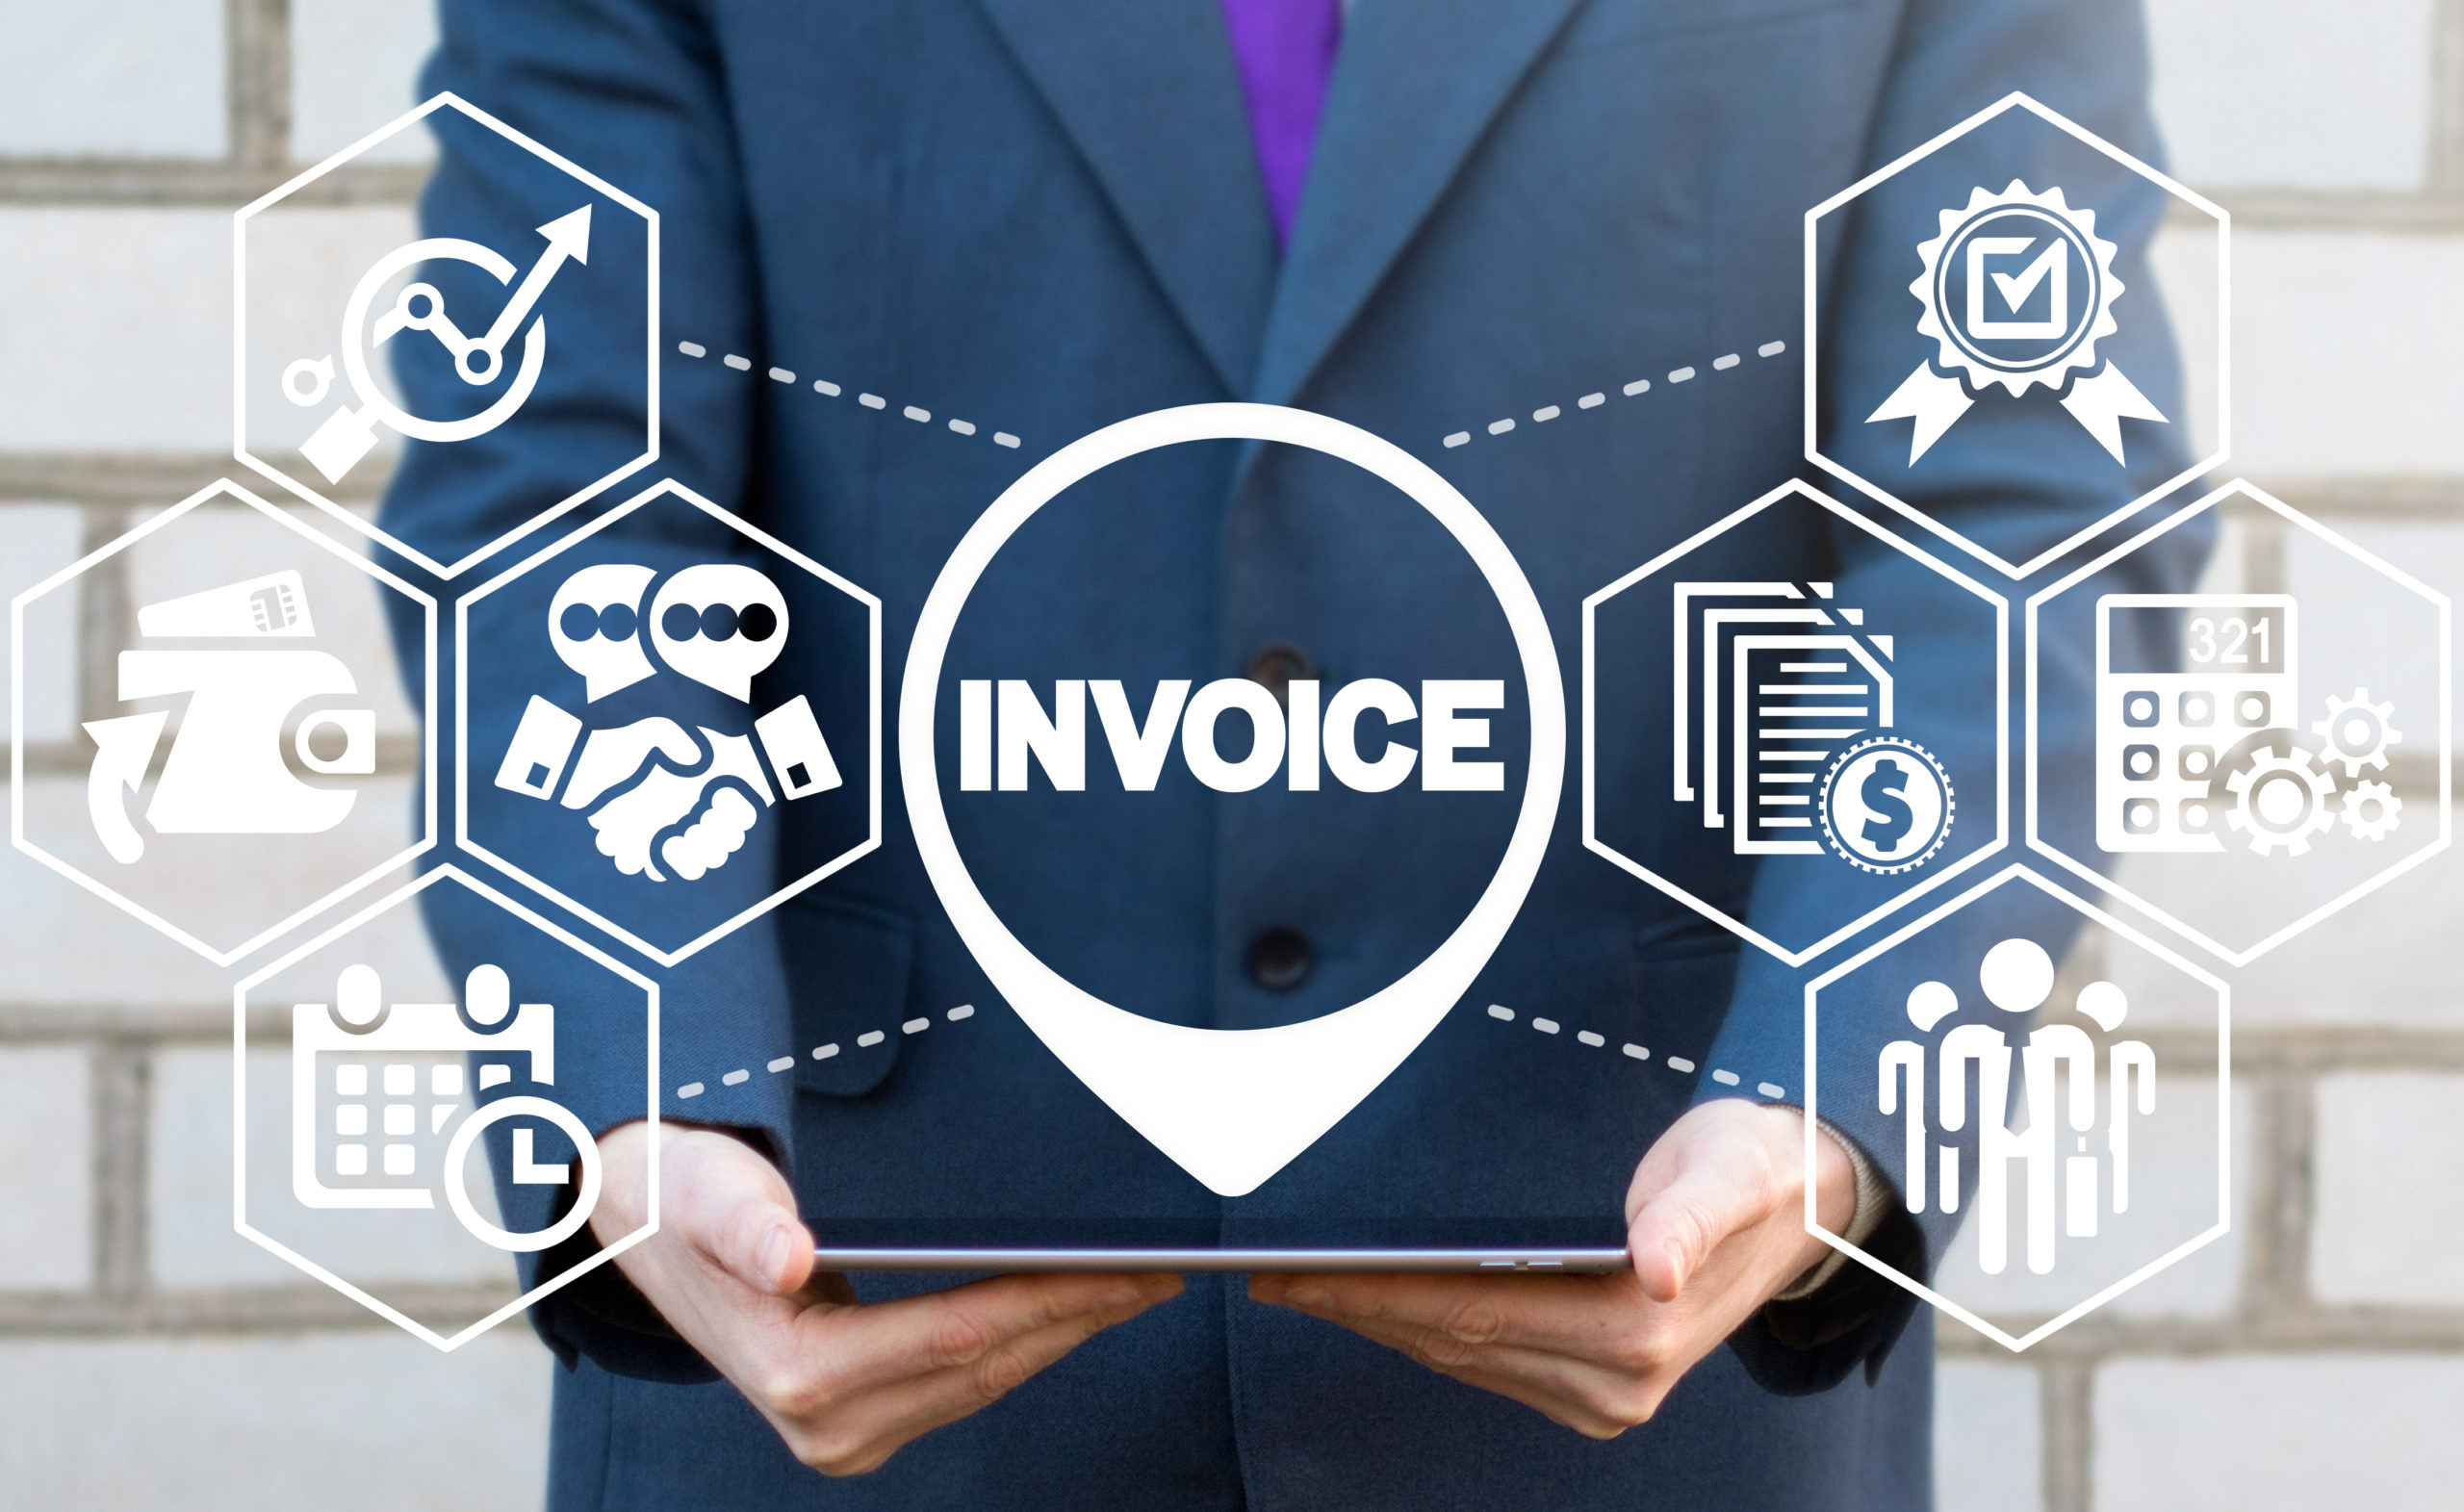 How Should Your Accounts Payable Handle Short-Paying Invoices?